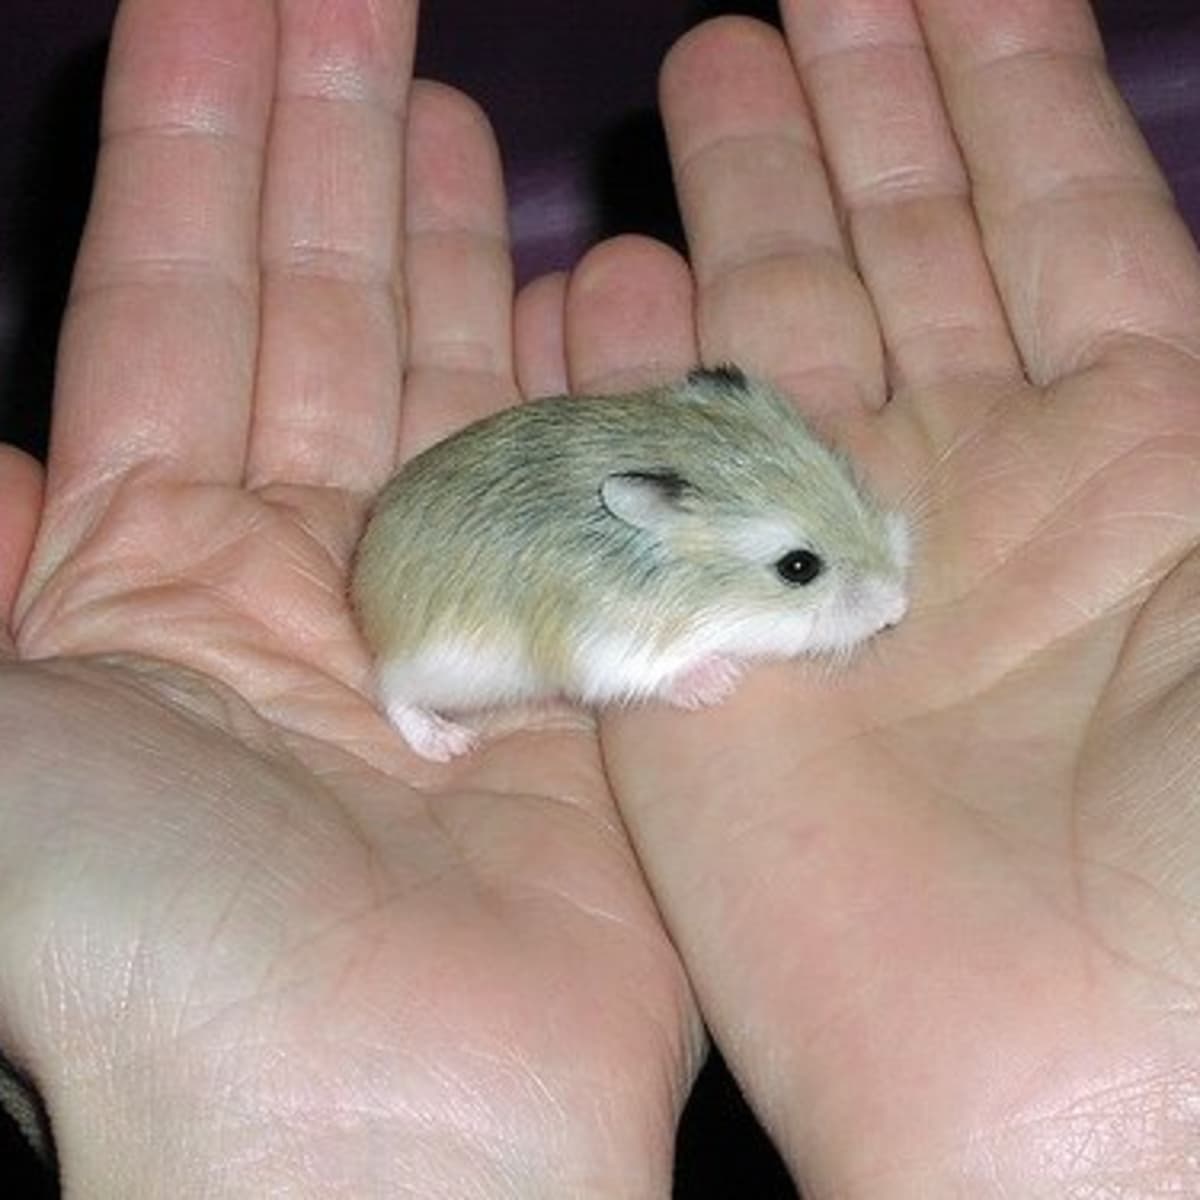 These 6 Tips Will Prolong Your Hamster's Life